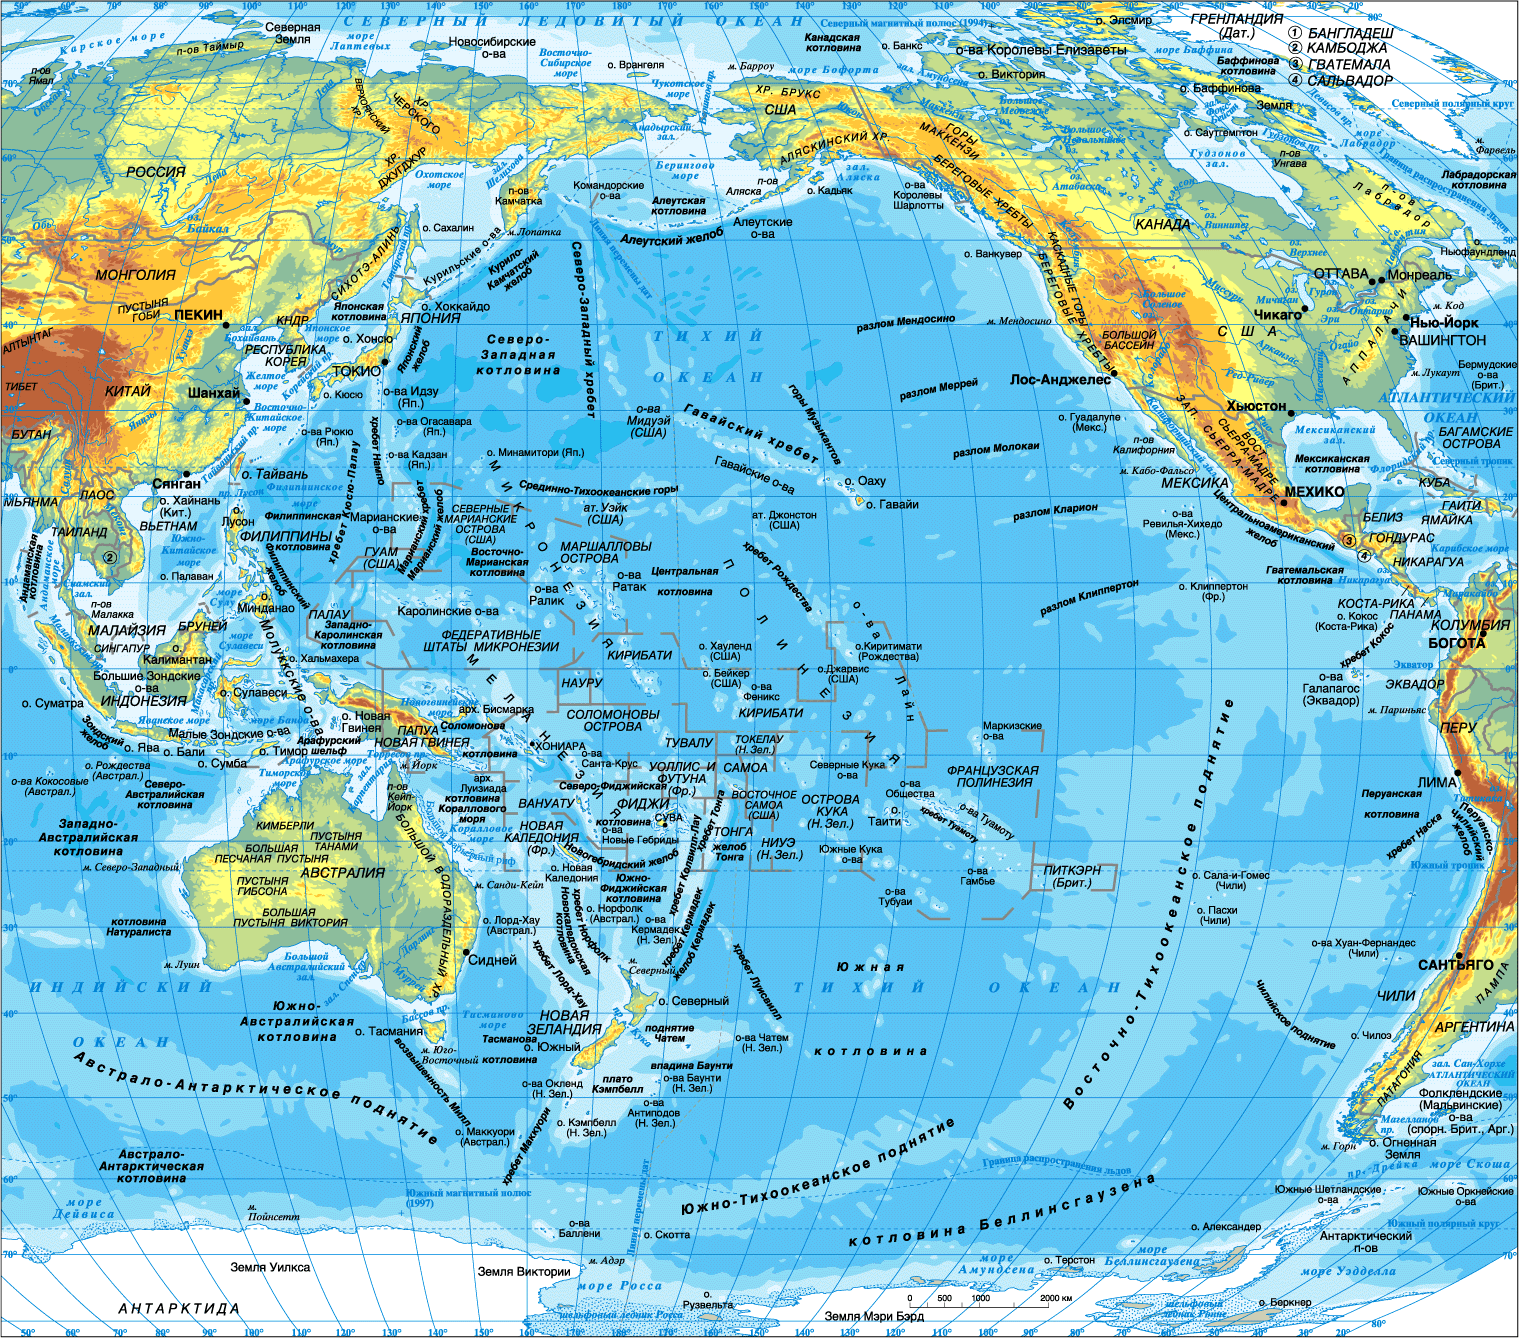 File:Pacific map.gif - Wikimedia Commons